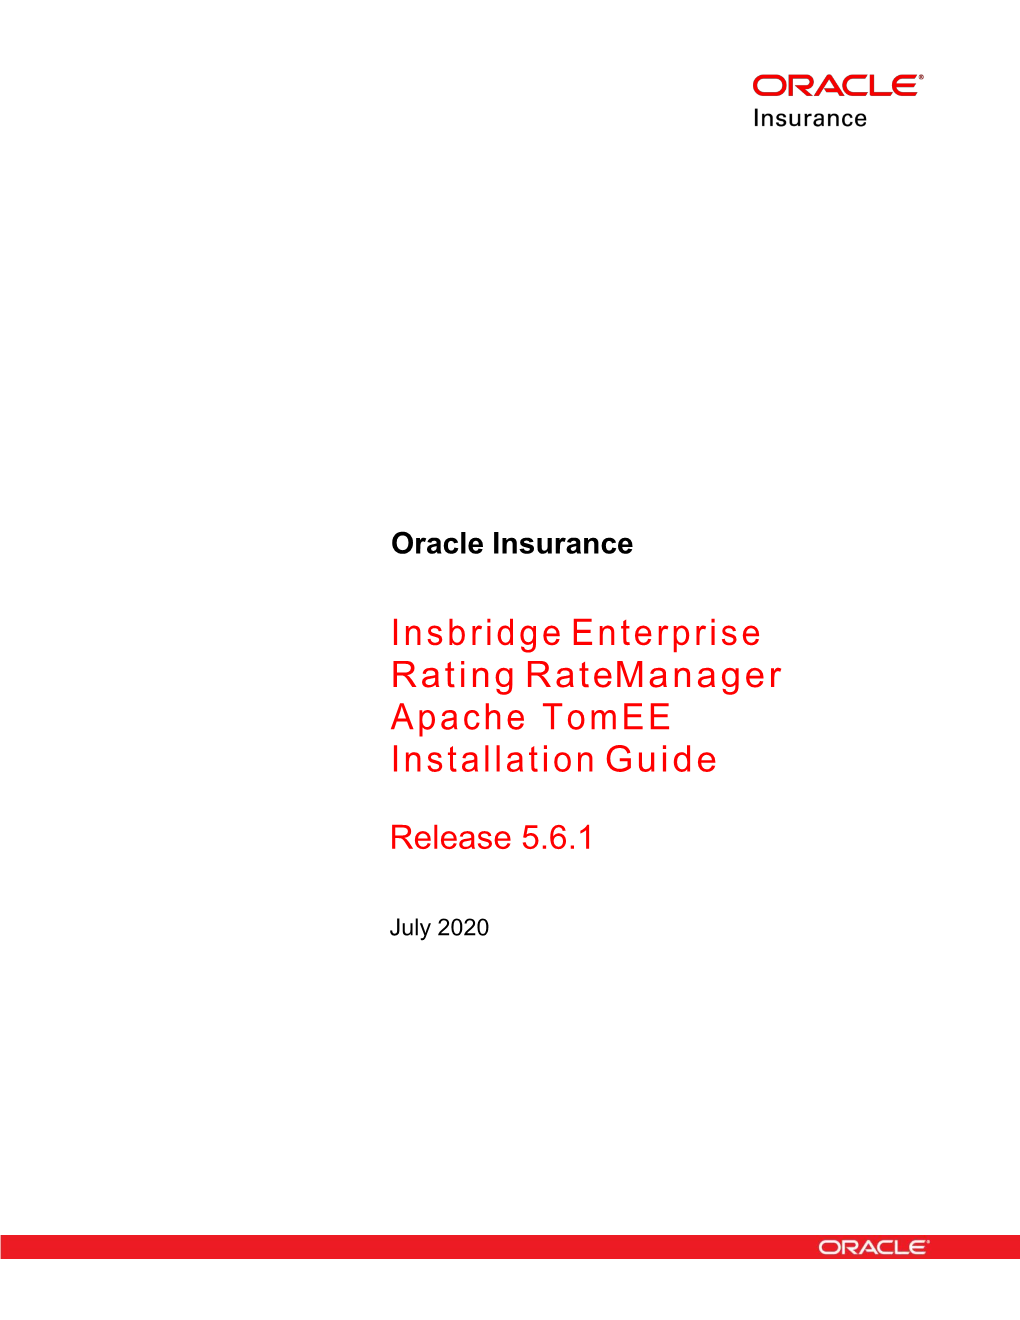 Insbridge Enterprise Rating Ratemanager Apache Tomee Installation Guide